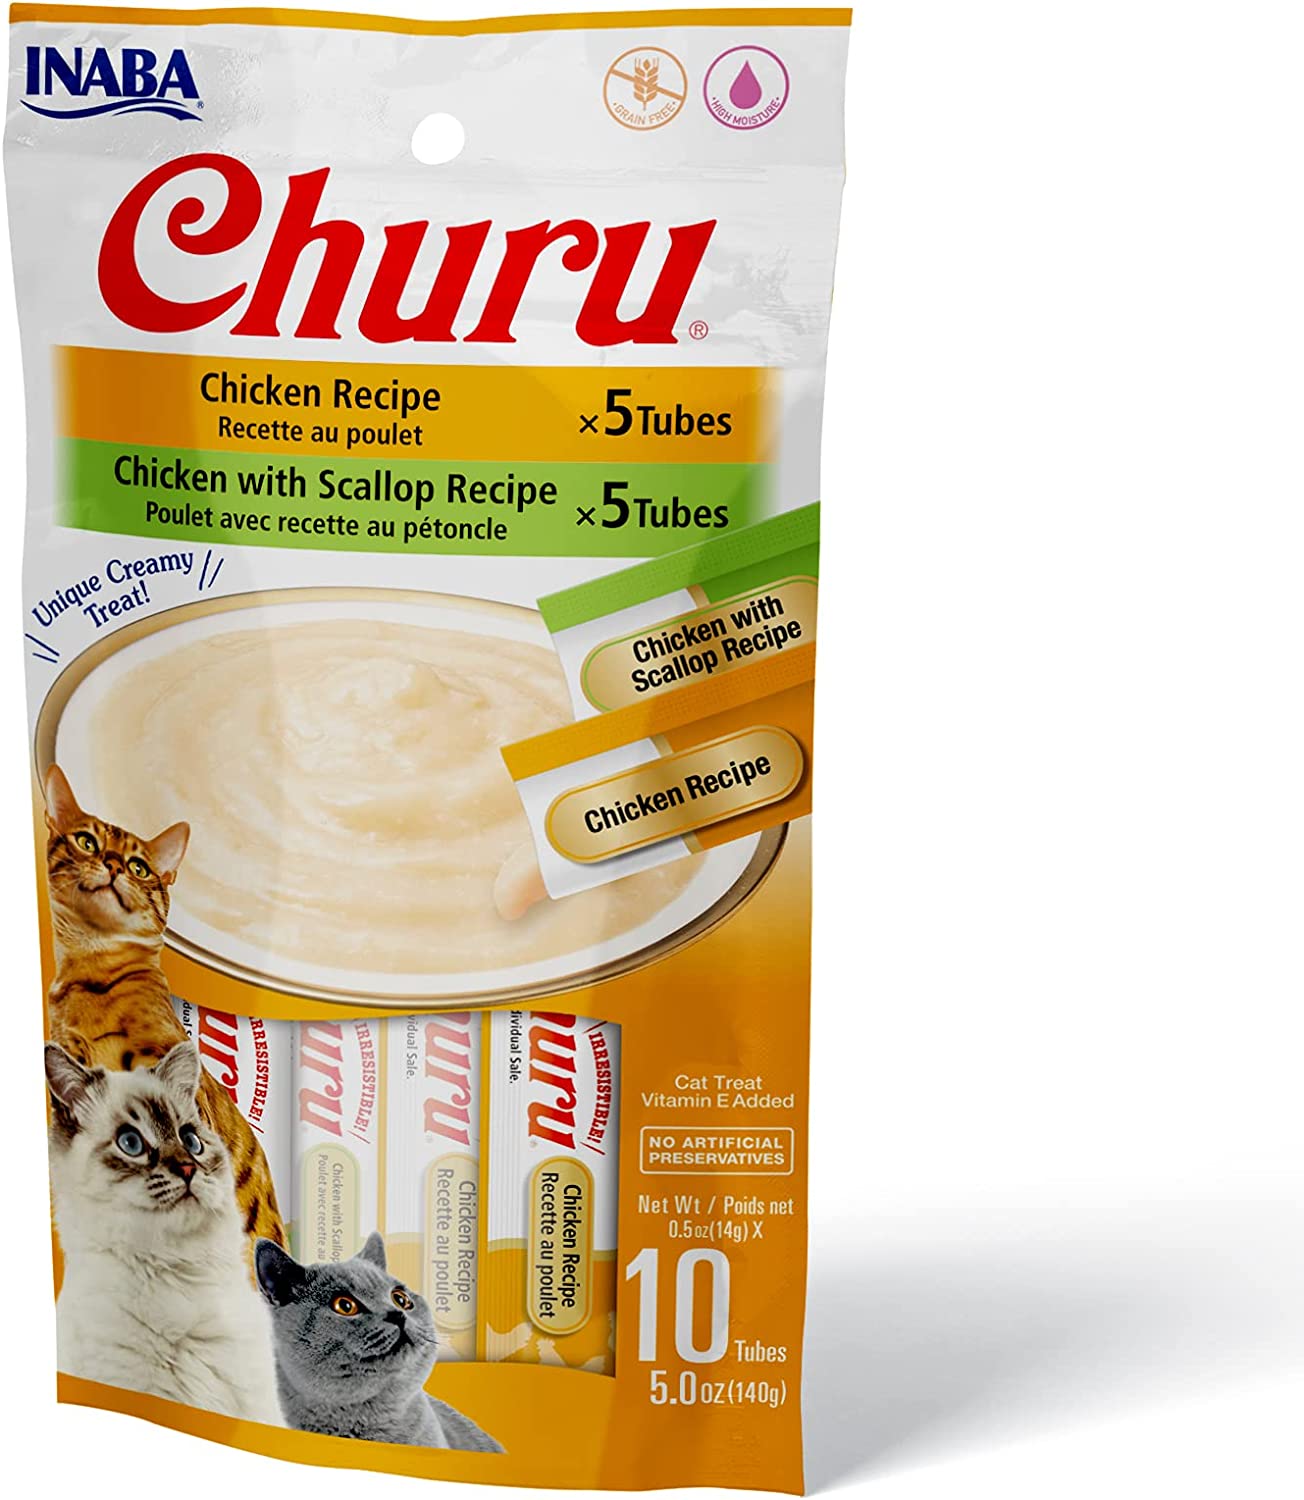 Inaba Churu Cat Treats, Grain-Free, Lickable, Squeezable Creamy Purée Cat Treat/Topper with Vitamin E & Taurine, 0.5 Ounces Each Tube, 10 Tubes Total/Two Flavors